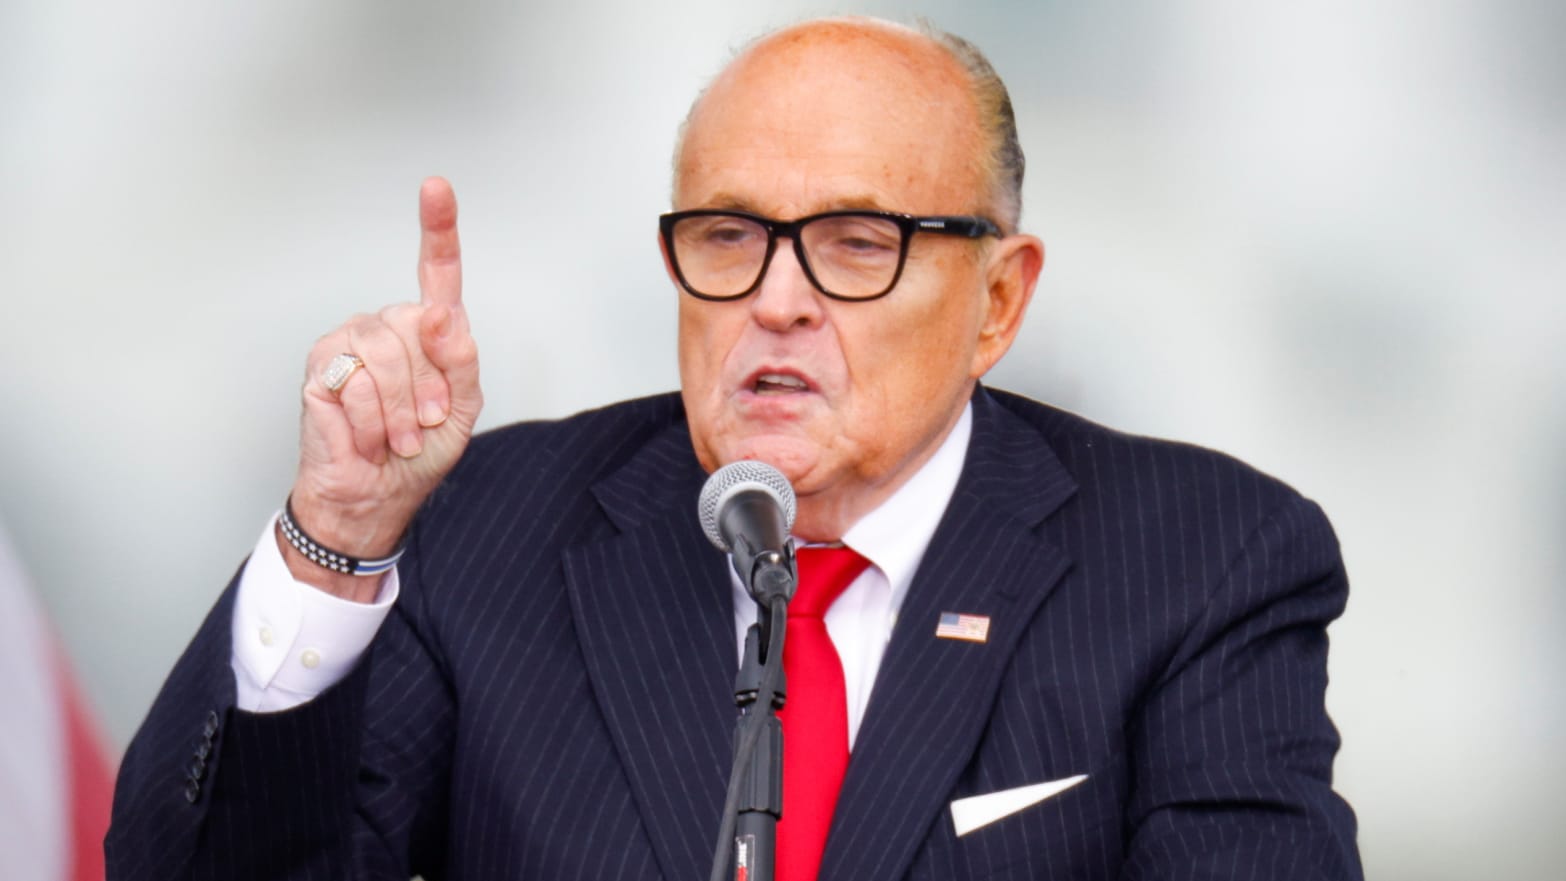 Rudy Giuliani gestures as he speaks as Trump supporters gather ahead of his speech to contest the certification by the U.S. Congress of the results of the 2020 U.S. presidential election in Washington, U.S, January 6, 2021.